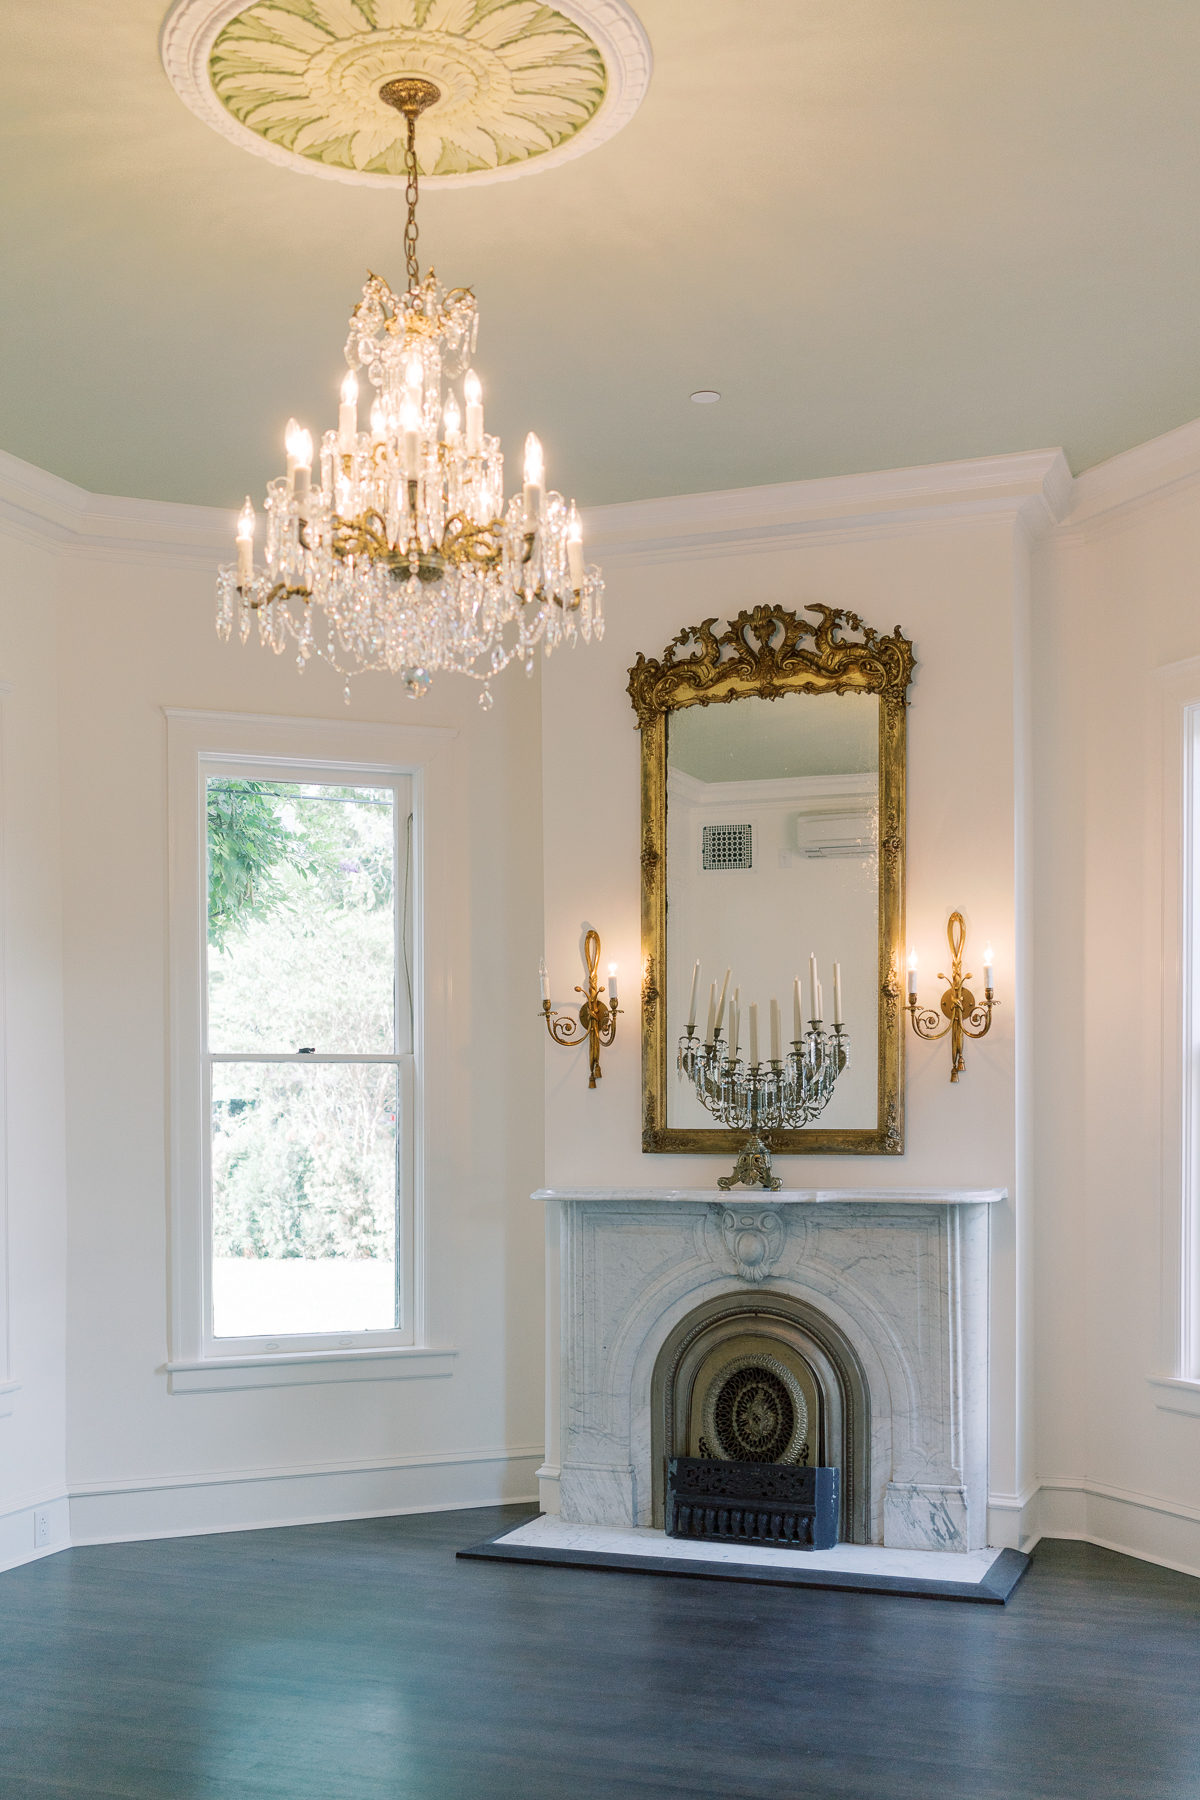 Check out this new beautiful white home wedding venue - Woodbine Mansion in Round Rock! 